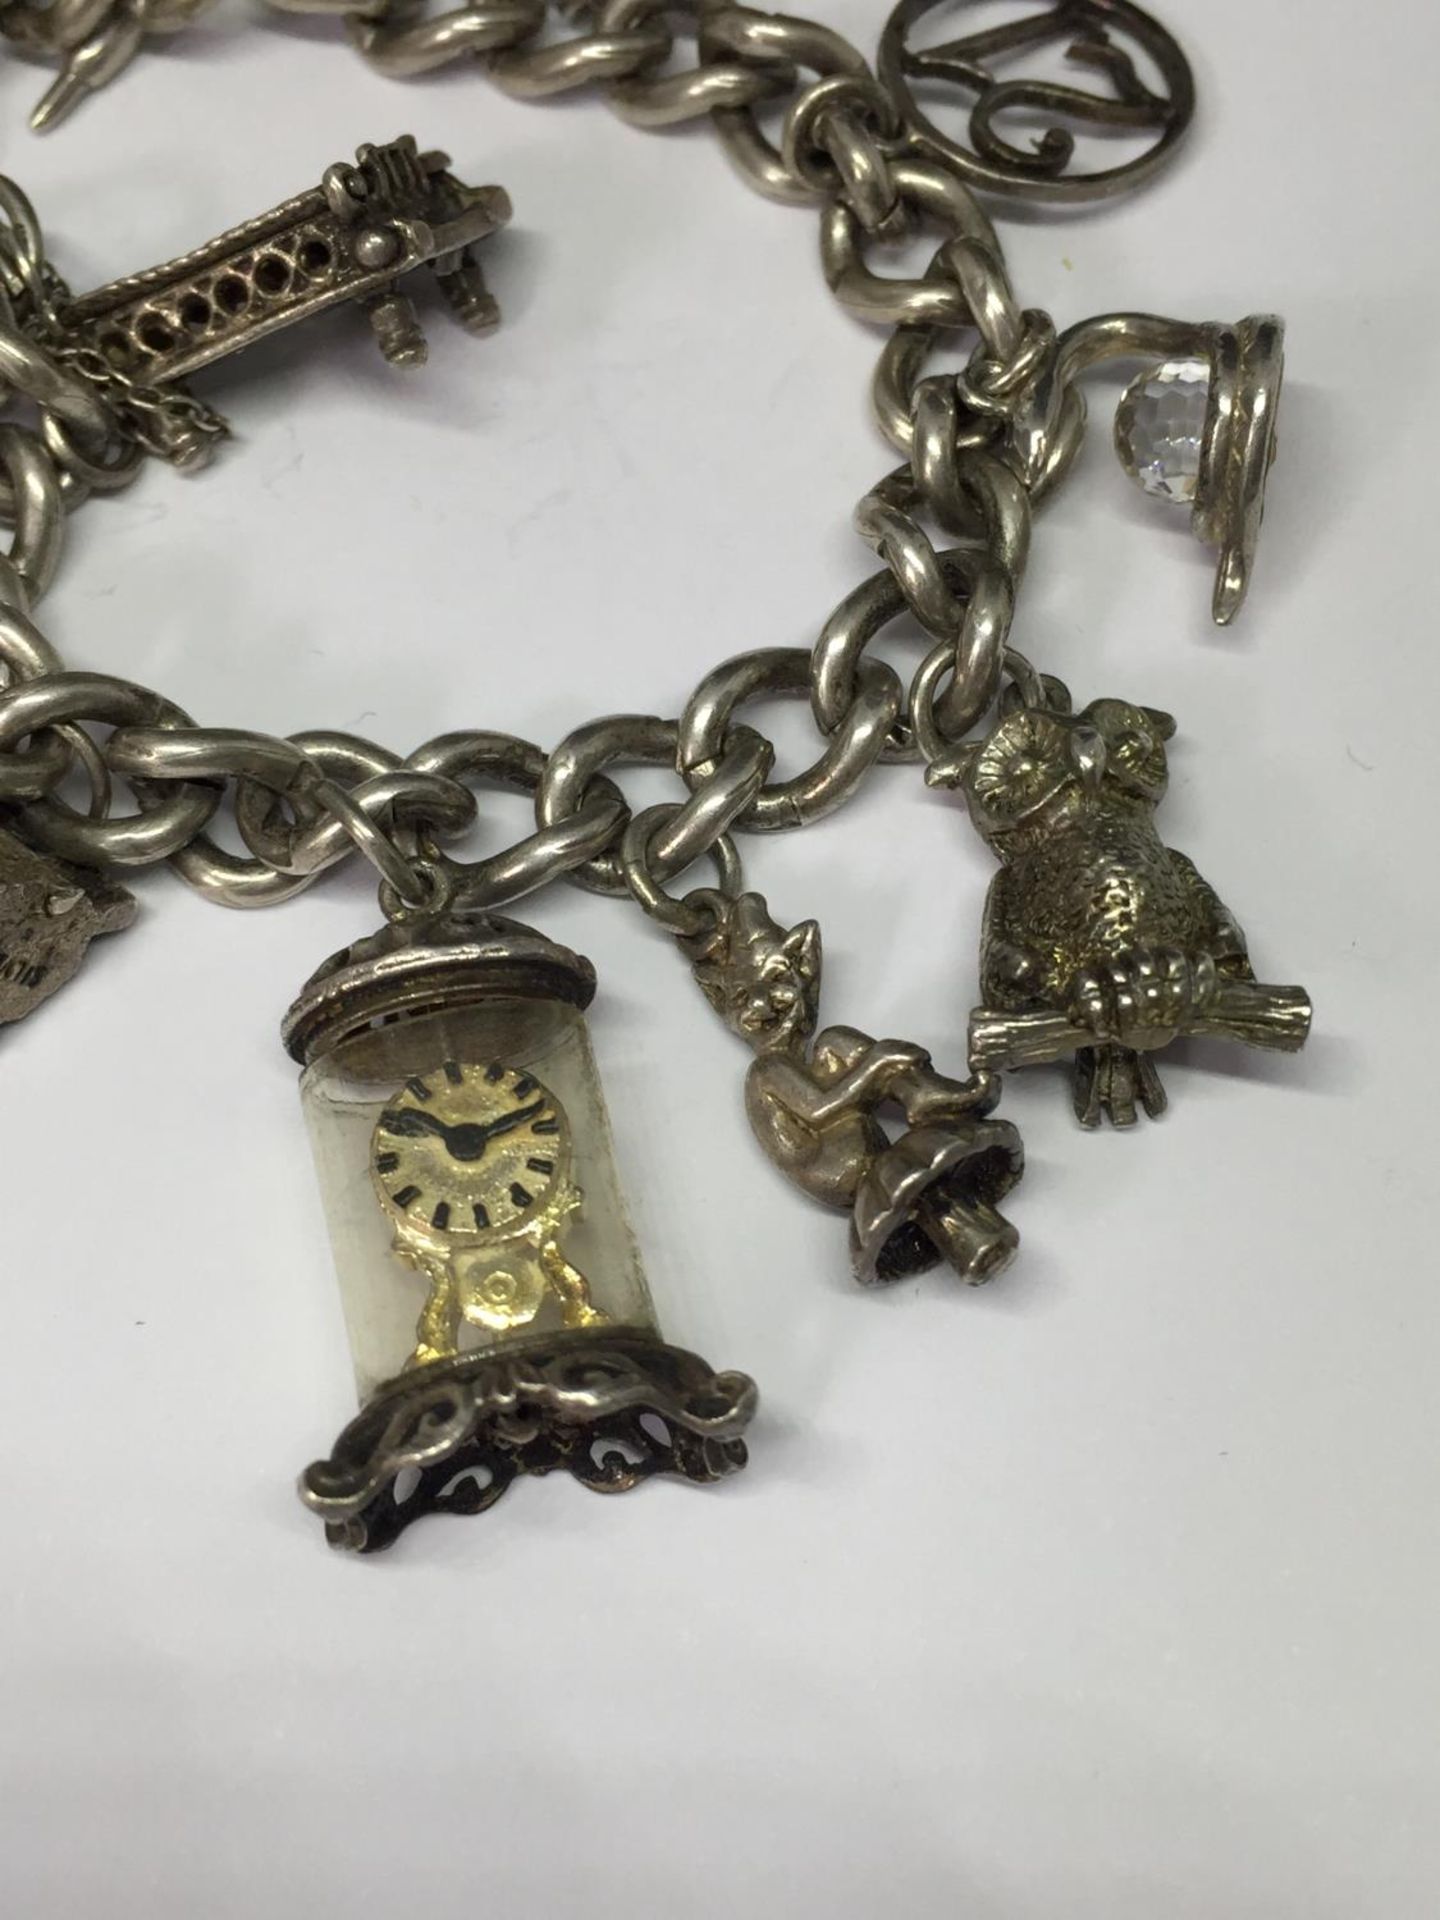 A SILVER CHARM BRACELET WITH THIRTEEN VARIOUS CHARMS - Image 2 of 4